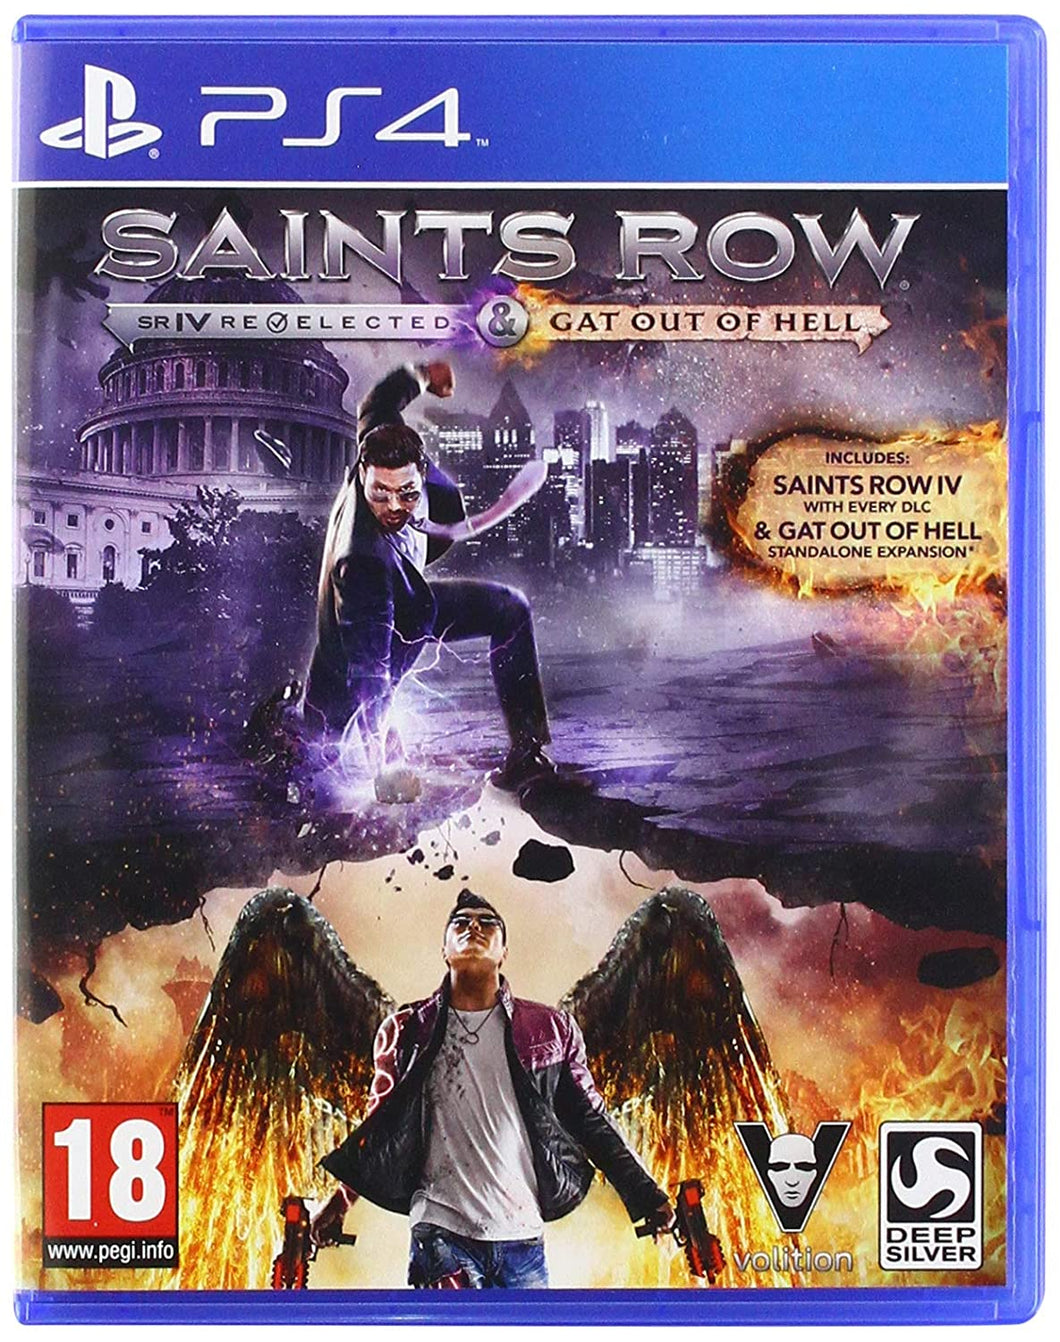 Saints Row Re-elected & Gat out of hell PS4